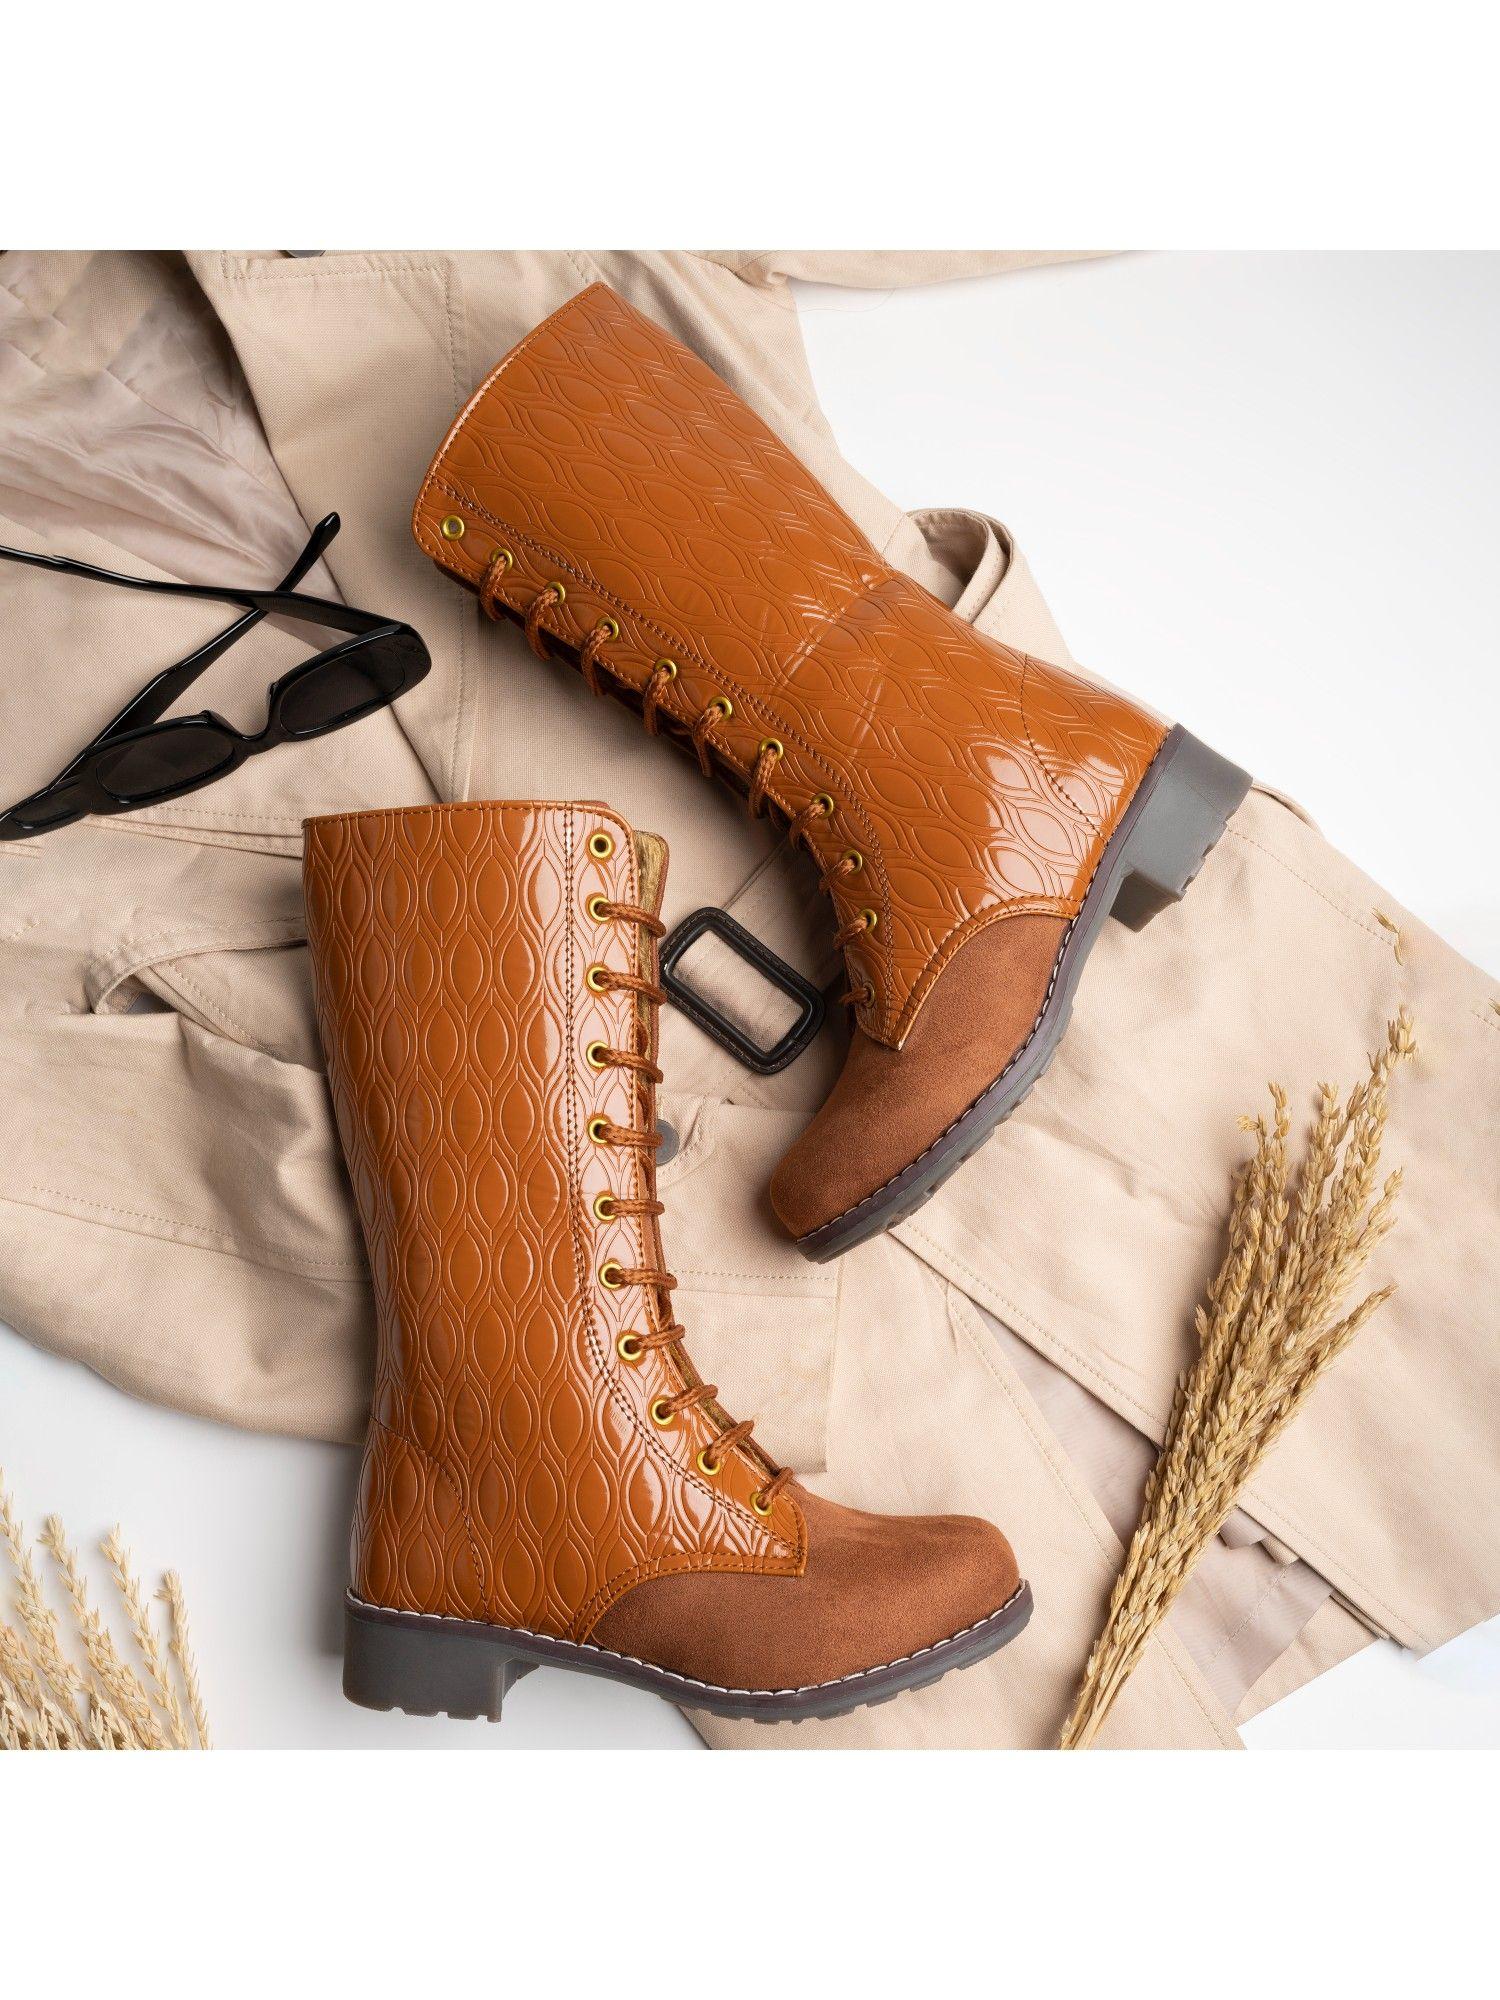 stylish casual comfortable tan boots with elegant lace up style for girls